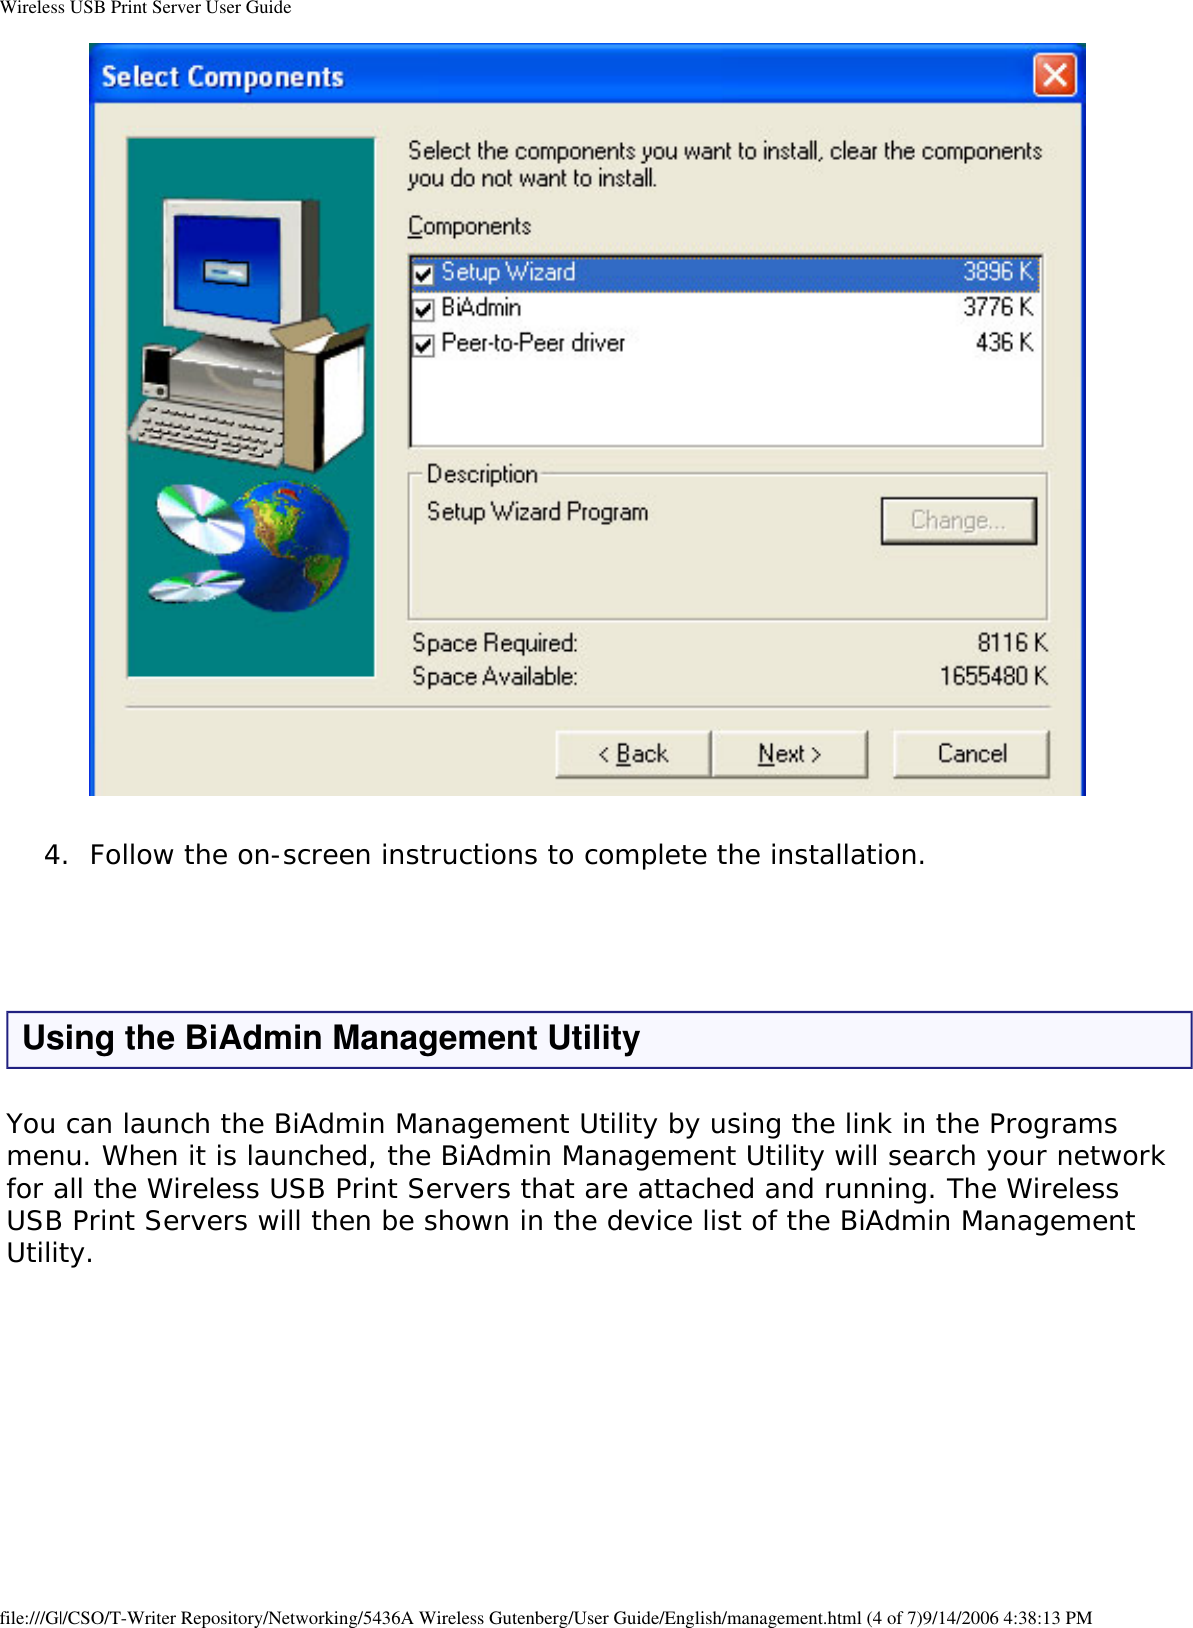 Wireless USB Print Server User Guide 4.  Follow the on-screen instructions to complete the installation.  Using the BiAdmin Management UtilityYou can launch the BiAdmin Management Utility by using the link in the Programs menu. When it is launched, the BiAdmin Management Utility will search your network for all the Wireless USB Print Servers that are attached and running. The Wireless USB Print Servers will then be shown in the device list of the BiAdmin Management Utility.   file:///G|/CSO/T-Writer Repository/Networking/5436A Wireless Gutenberg/User Guide/English/management.html (4 of 7)9/14/2006 4:38:13 PM